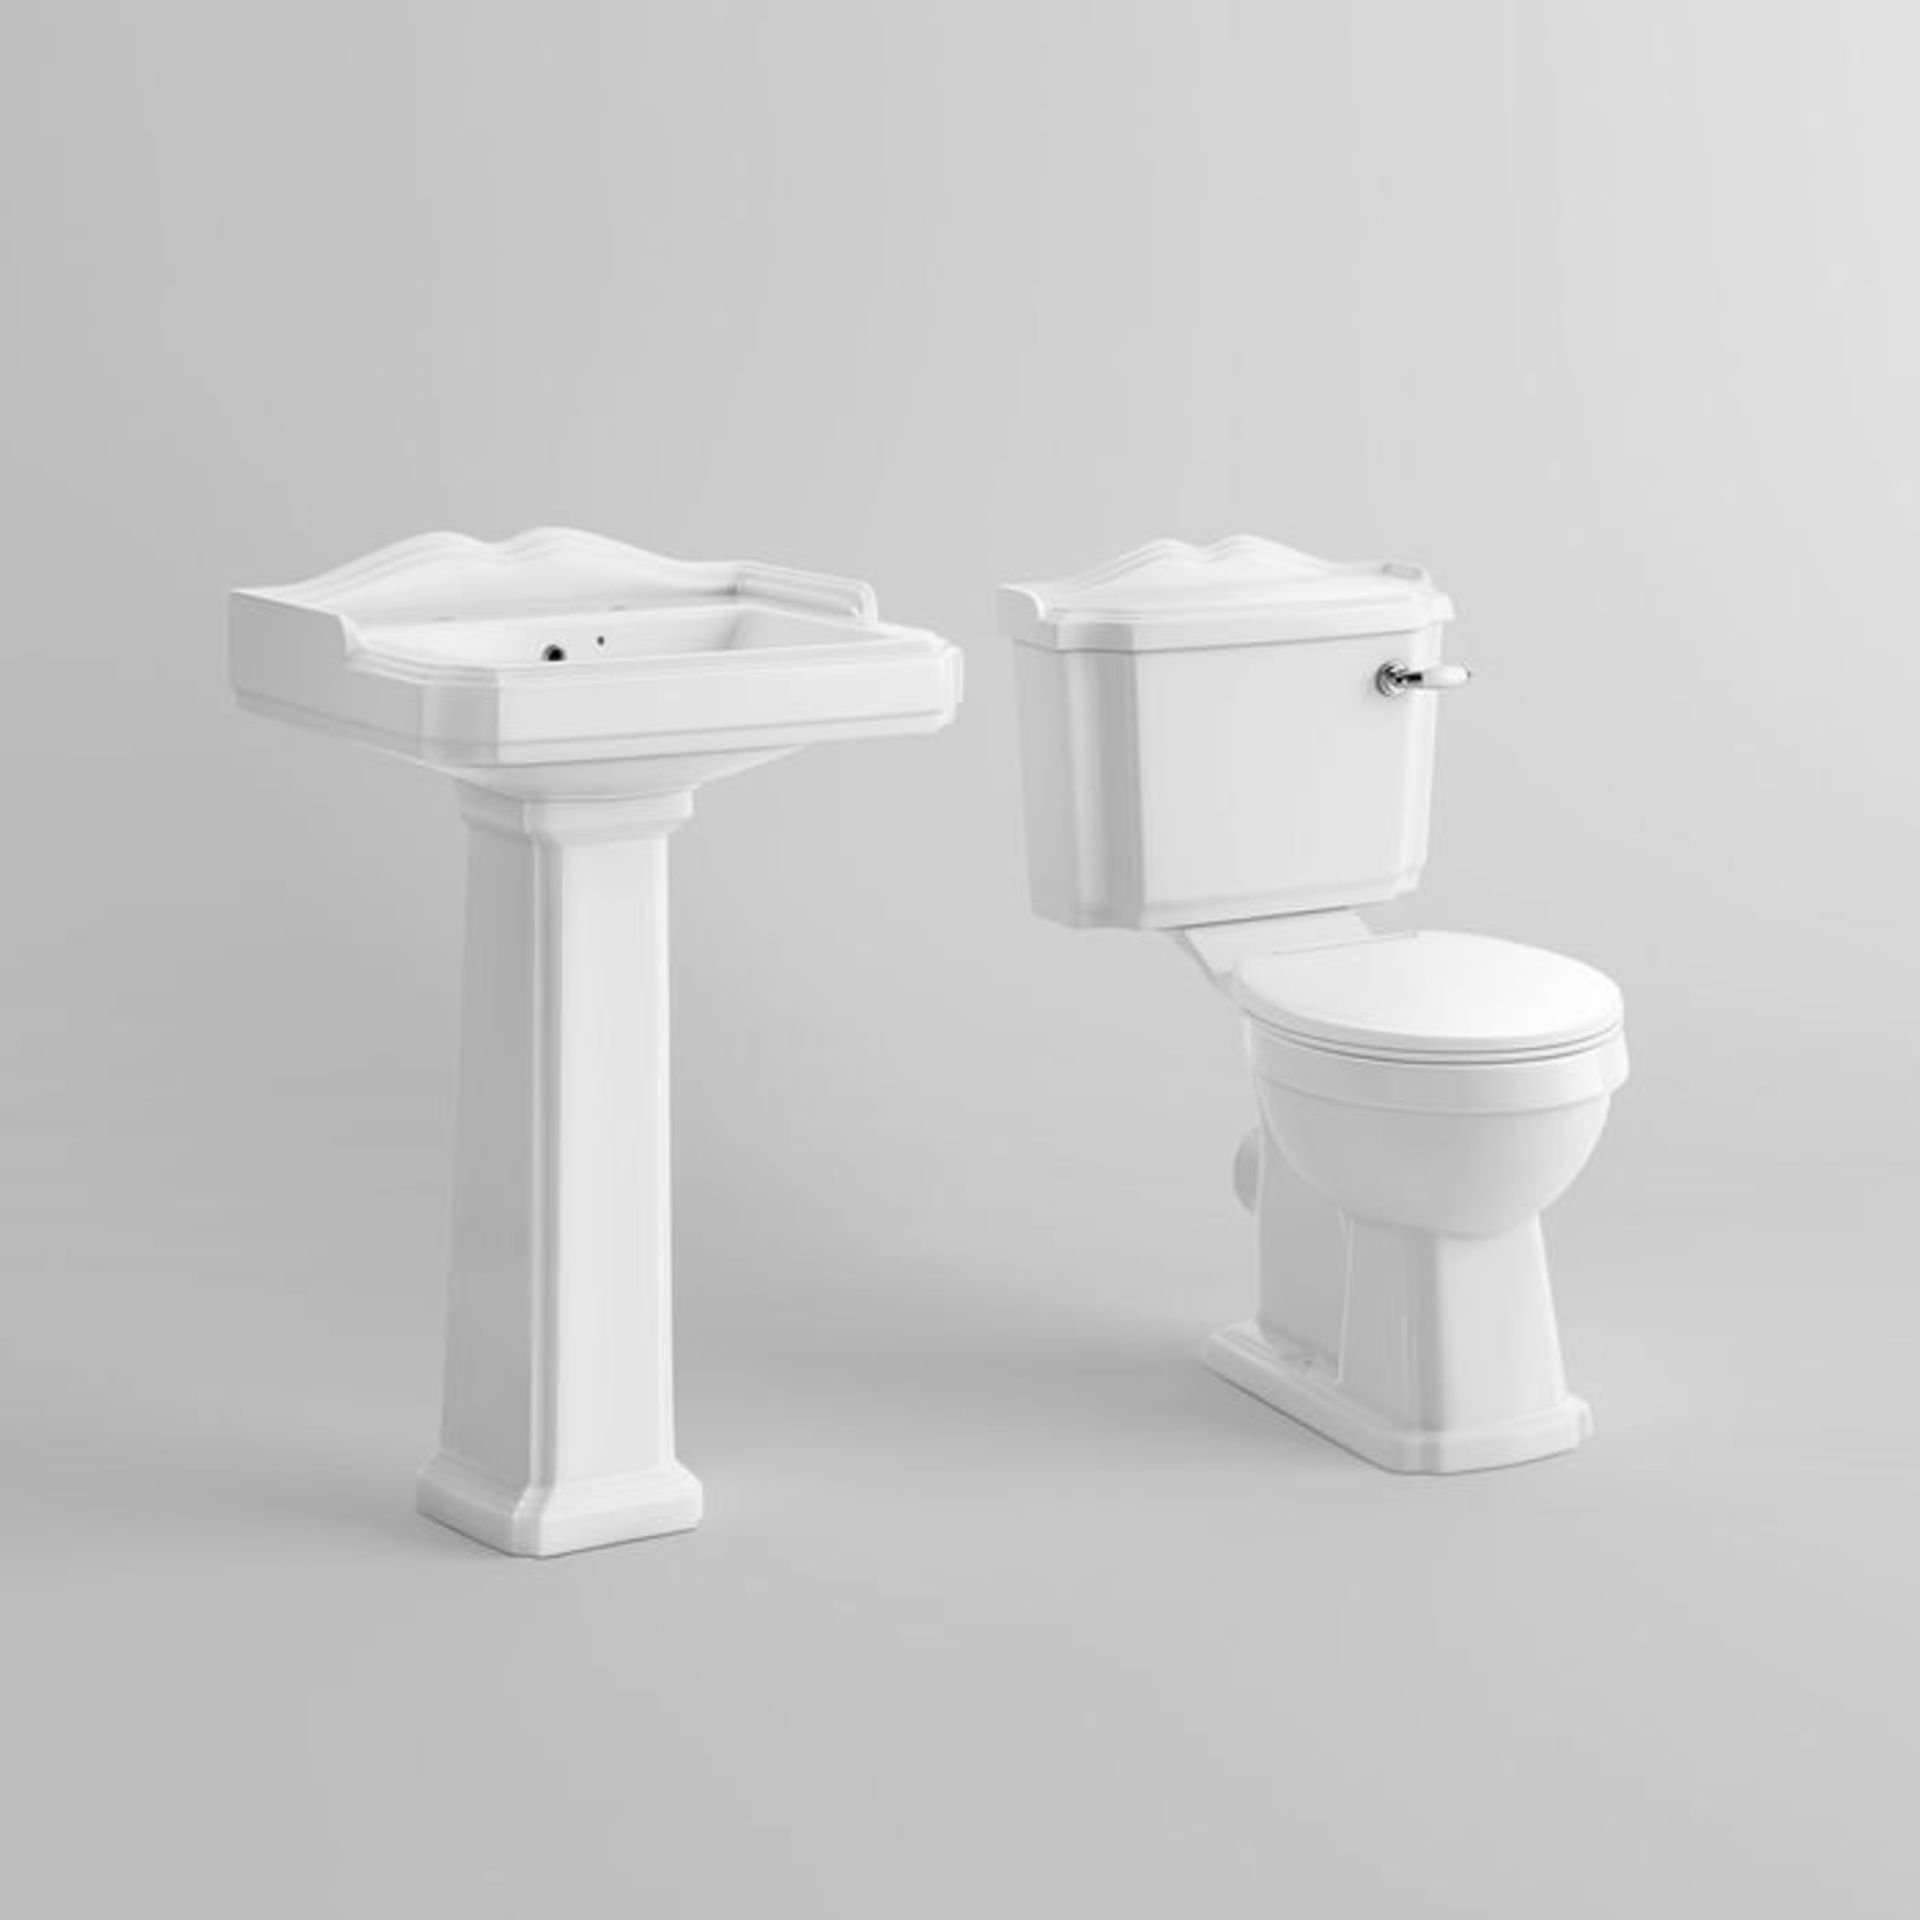 (M24) Victoria Close Coupled Toilet Set & Double Tap Basin - White Seat. RRP £424.99. FULL SET. Made - Image 2 of 3